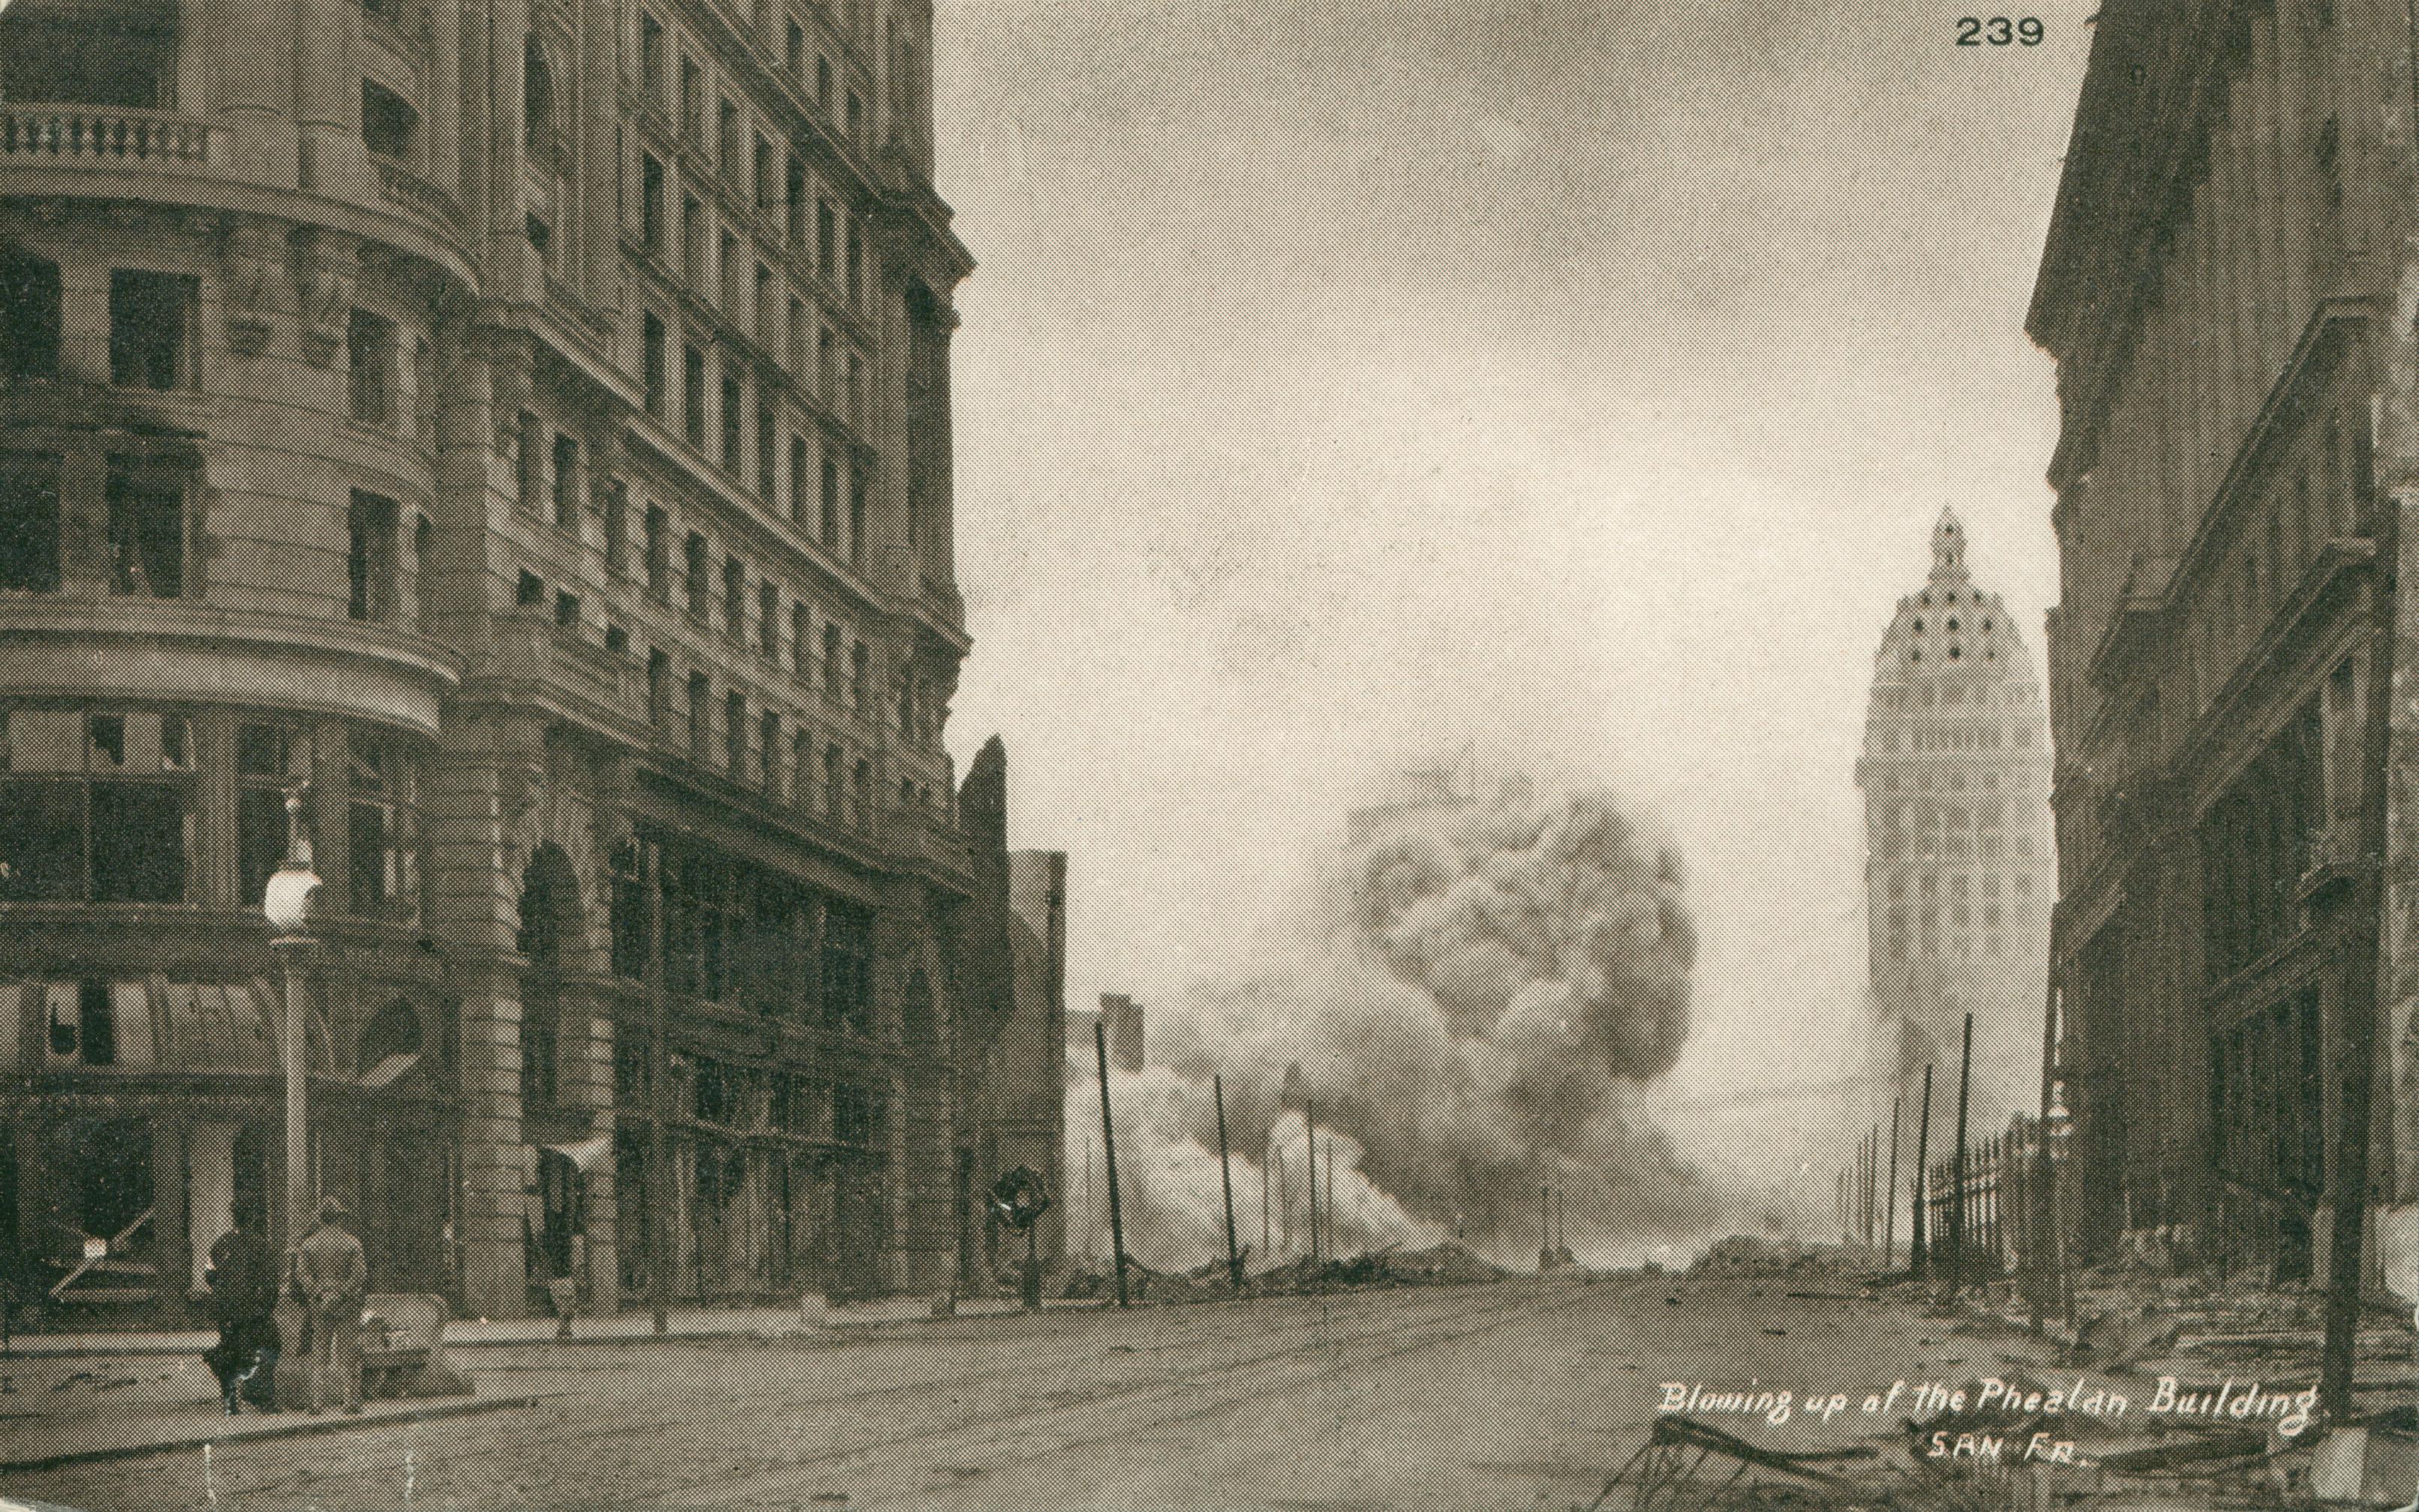 Shows a cloud of dust from the collapse of a building at the end of the street